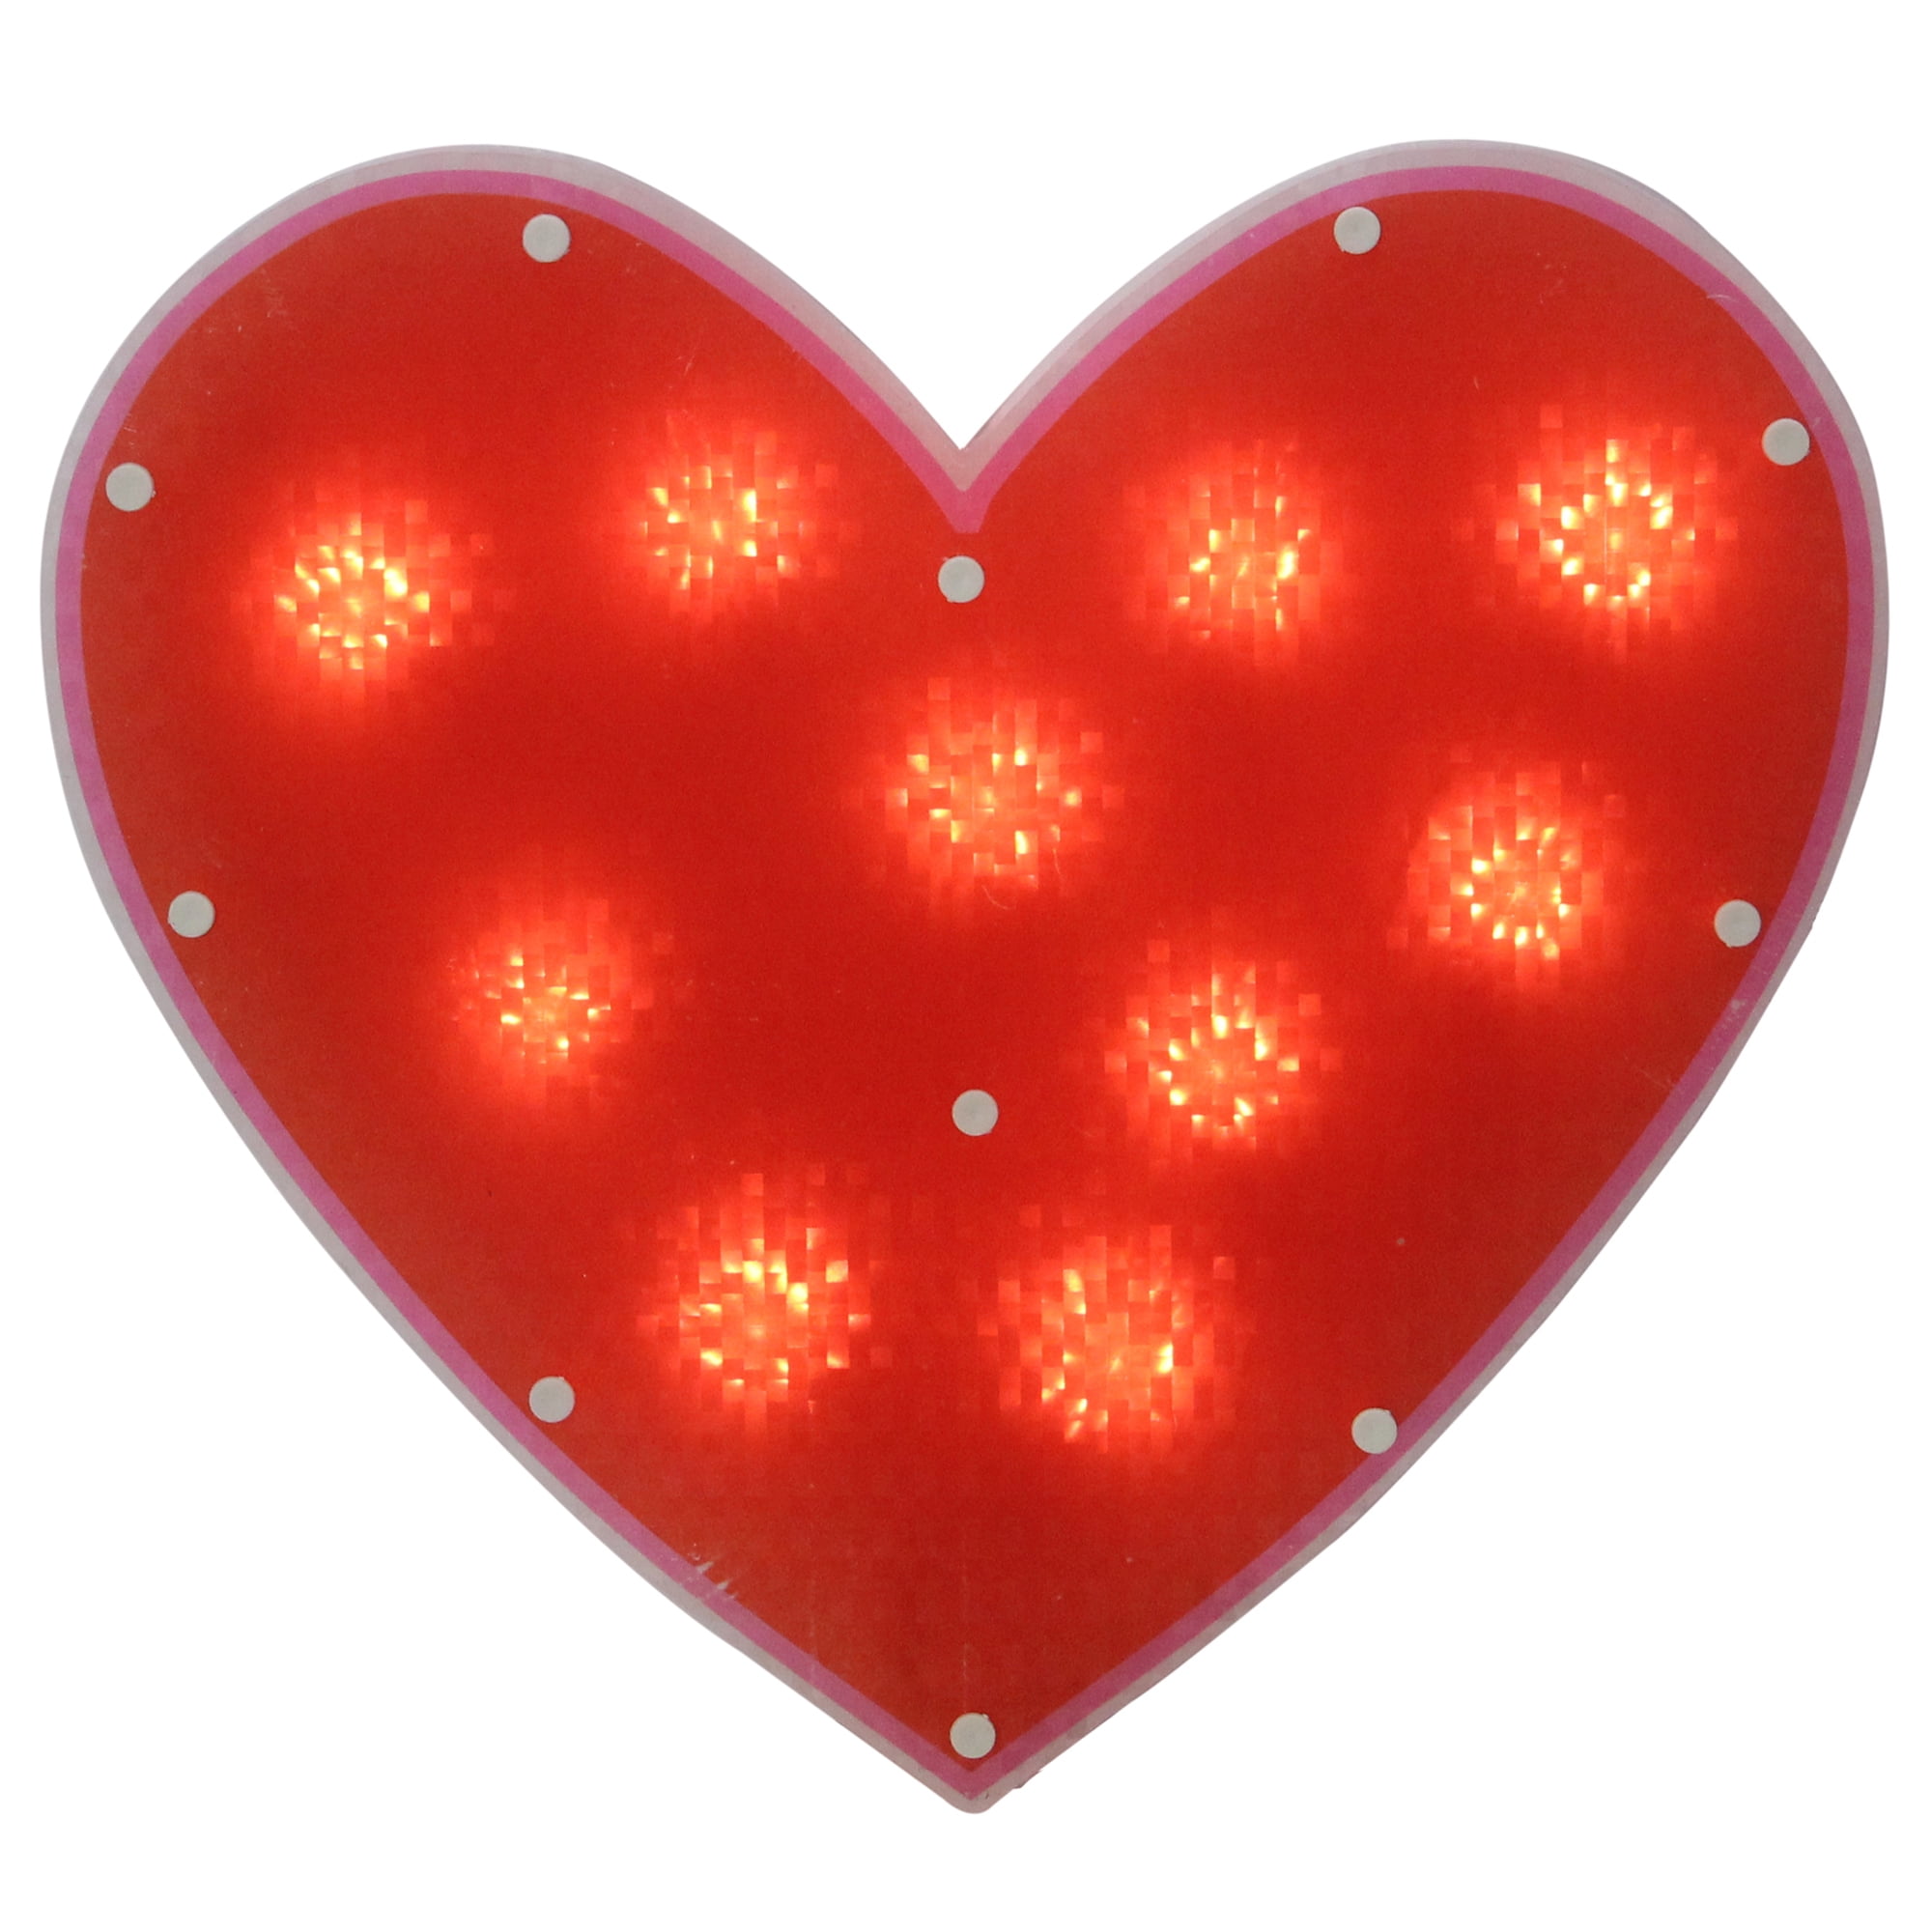 LIGHTED VALENTINES DAY HEART Pink & Red Heart Silhouette Window Decoration 